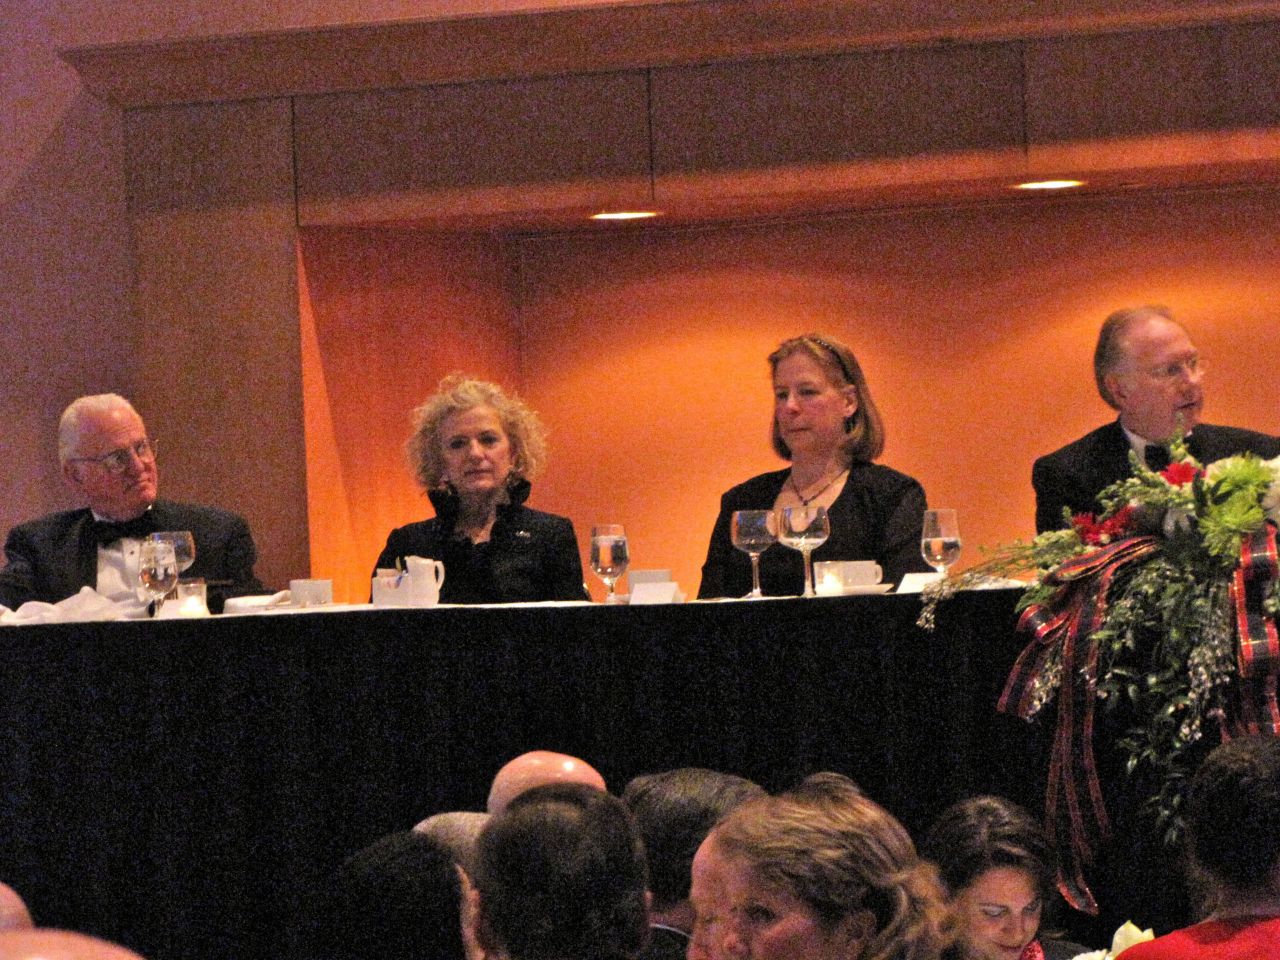 From left (click to enlarge): Chicago Ald. Ed Burke, State Supreme Court Justice Anne Burke, Mary Kilbride, State Supreme Court Justice Thomas Kilbride